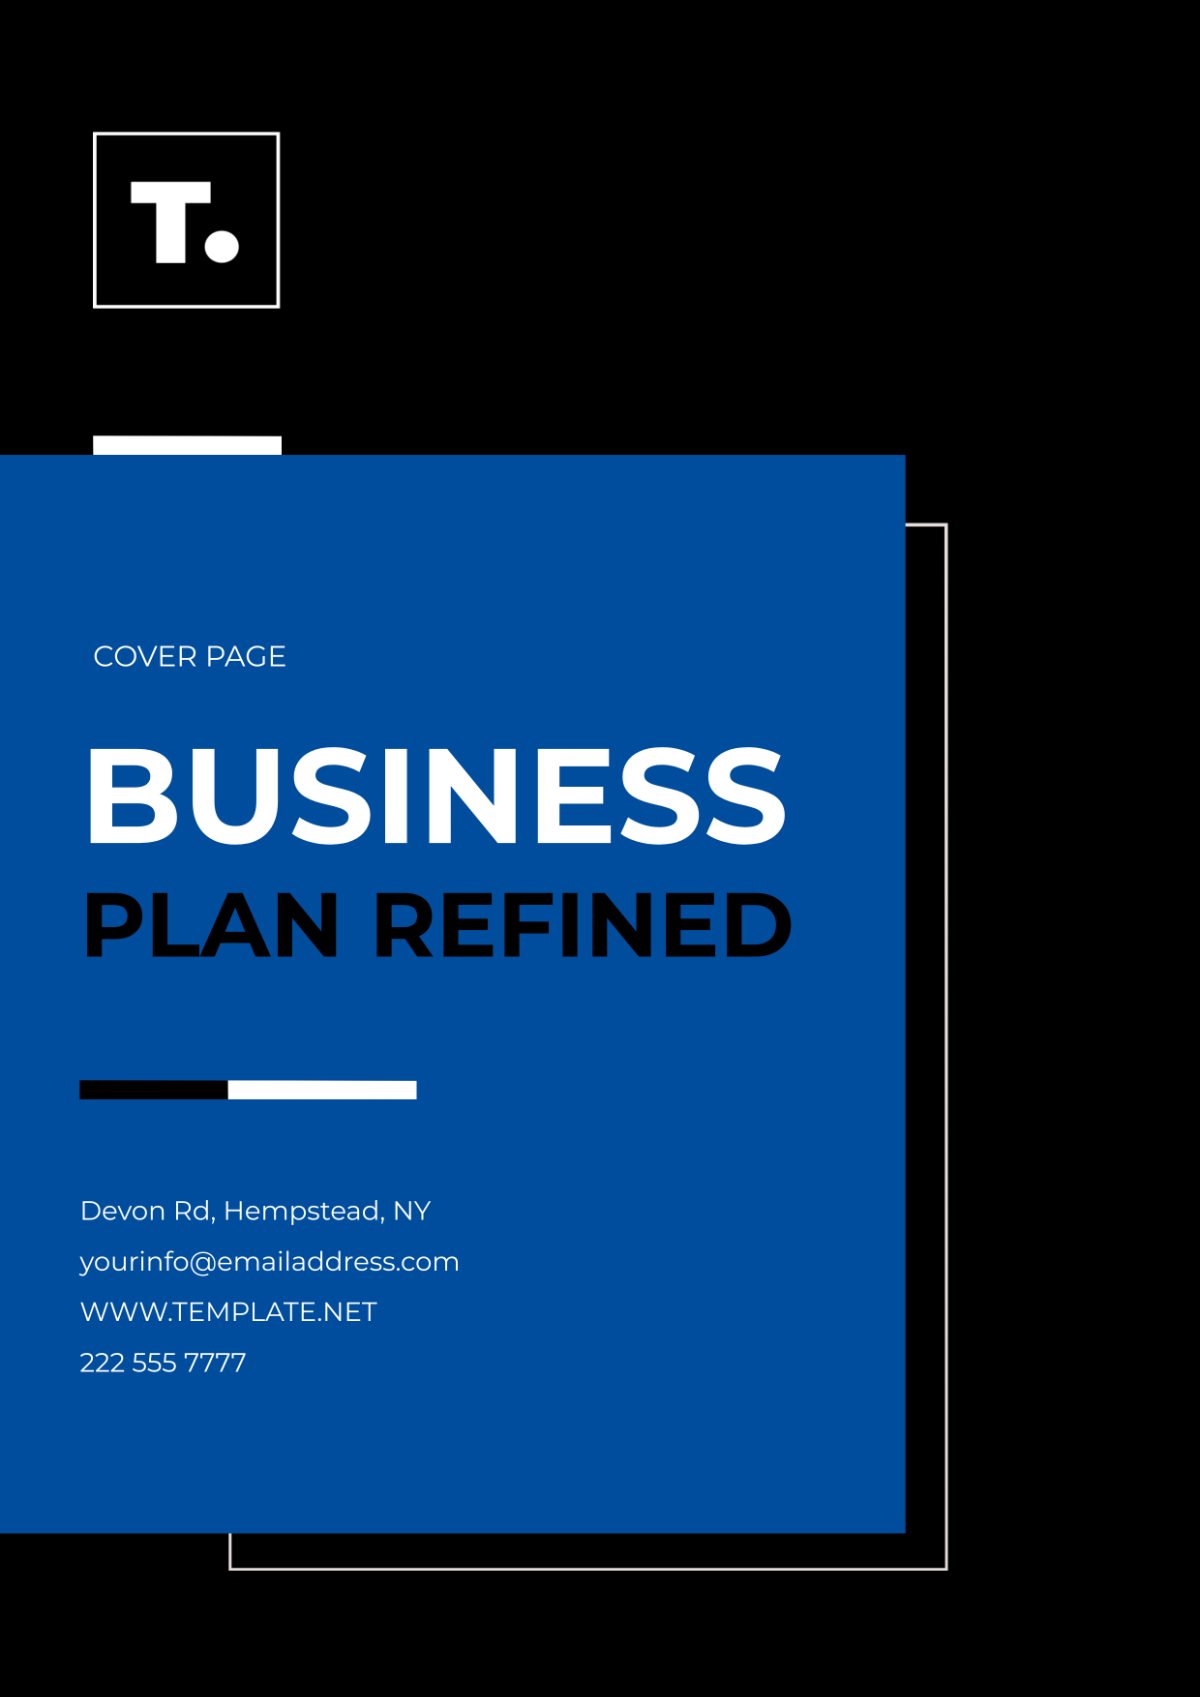 Business Plan Refined Cover Page